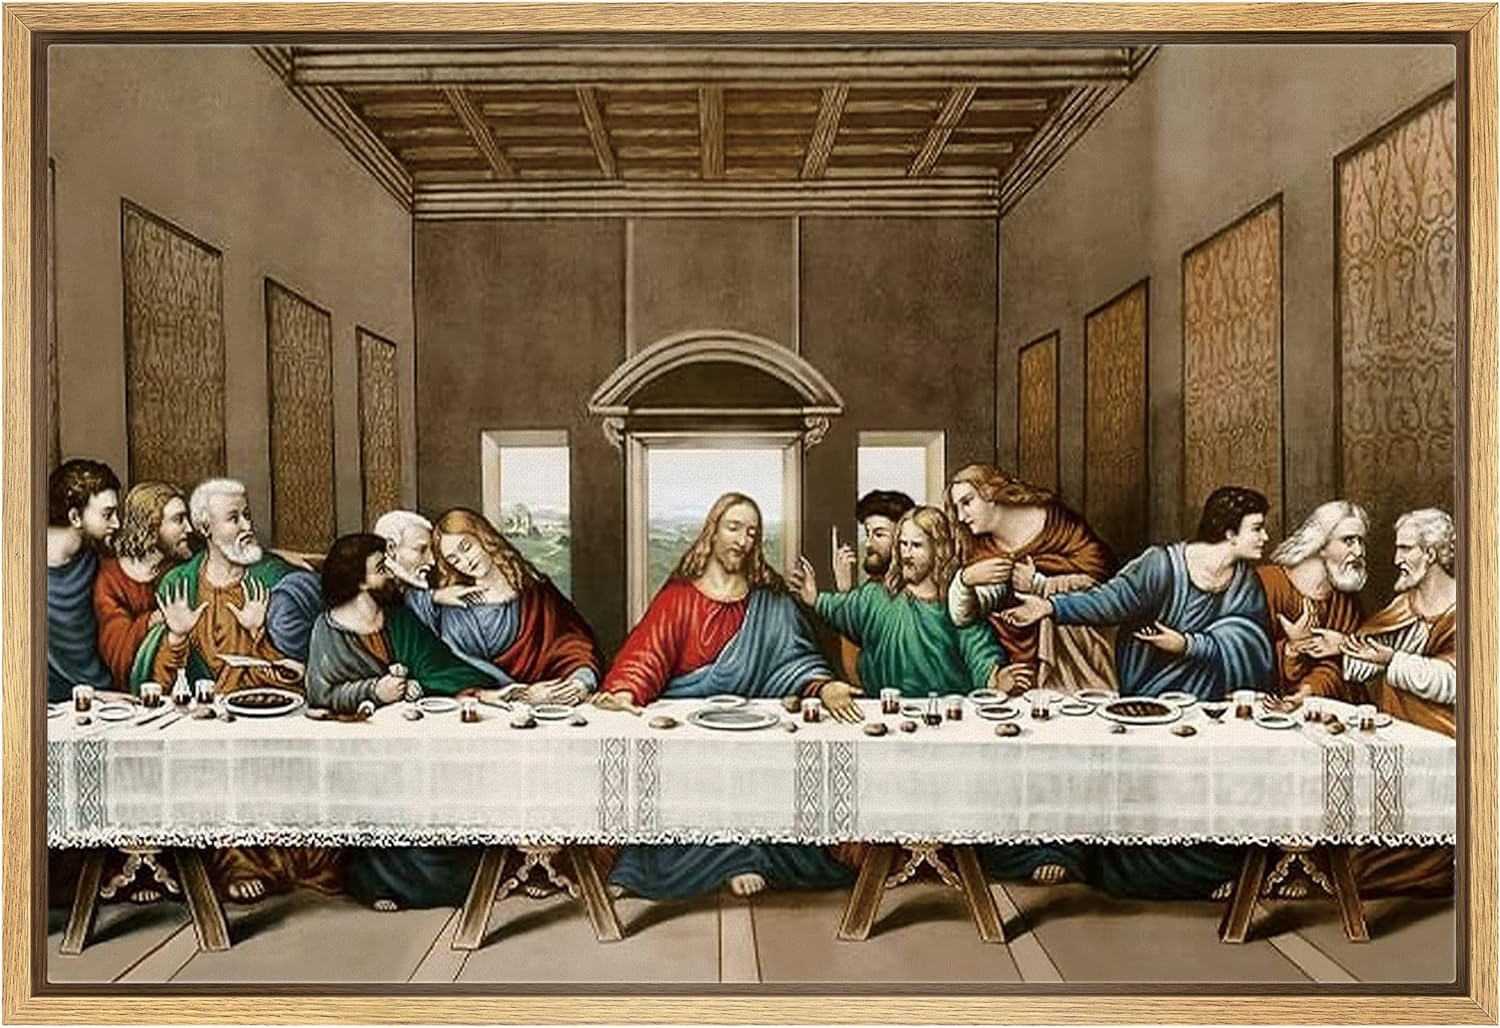 IDEA4WALL Framed Canvas Wall Art for Living Room, Bedroom La Ultima Cena Cuadro The Last Supper by Leonardo Da Vinci Canvas Prints for Home Decoration Ready to Hanging - image 1 of 5